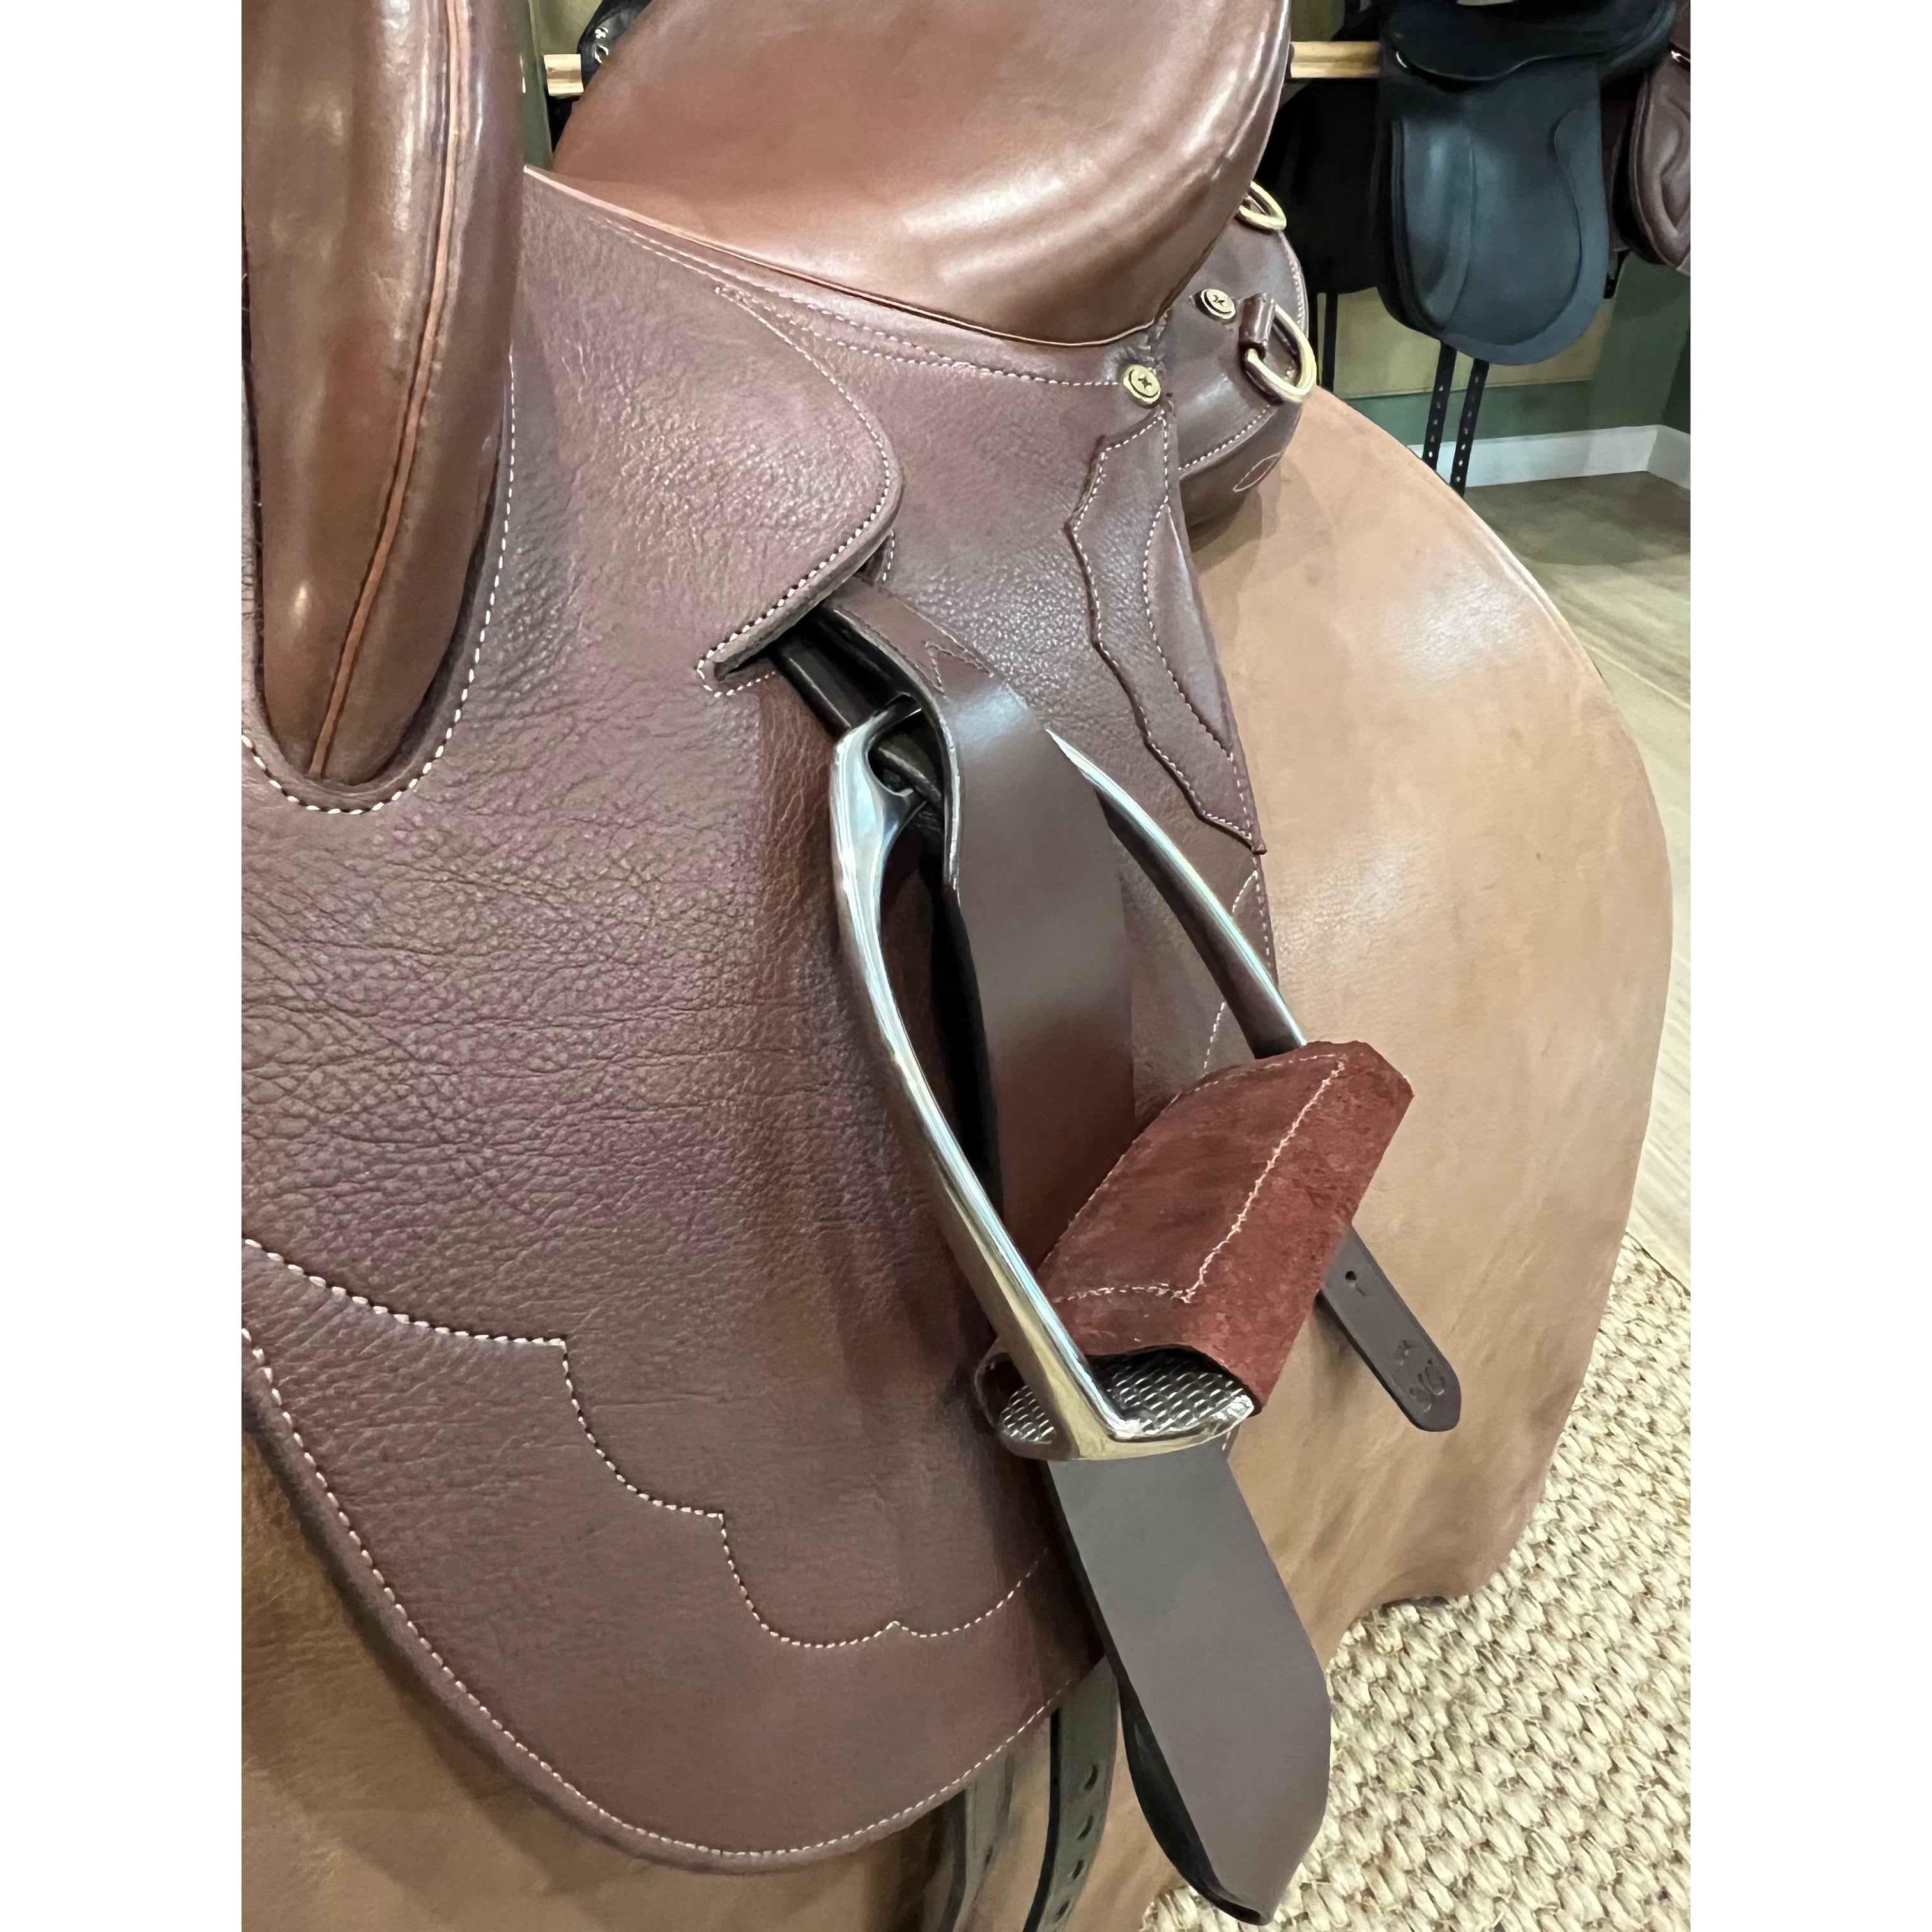 Comfort Stability Stirrup Leathers Jump and Dressage